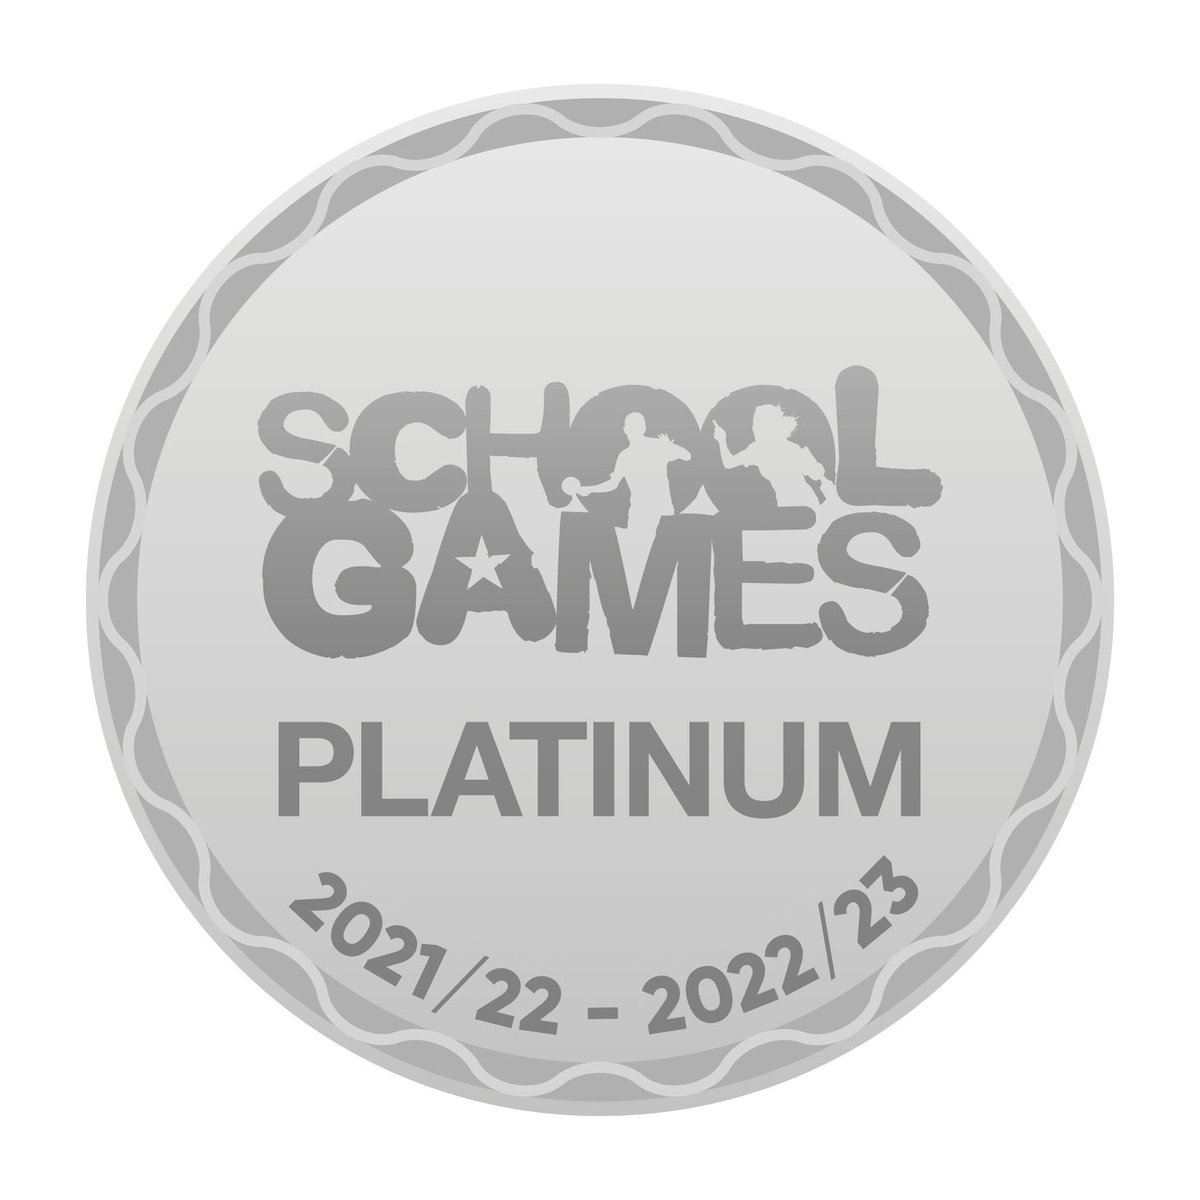 And another PLATINUM AWARD goes to ⁦@KestonCe⁩ Primary Scho. An amazing achievement for a small school. ⁦@YourSchoolGames⁩ ⁦@YouthSportTrust⁩ ⁦@Sport_England⁩ #welldone bromley #couldntbeprouder #seeyouallinseptember